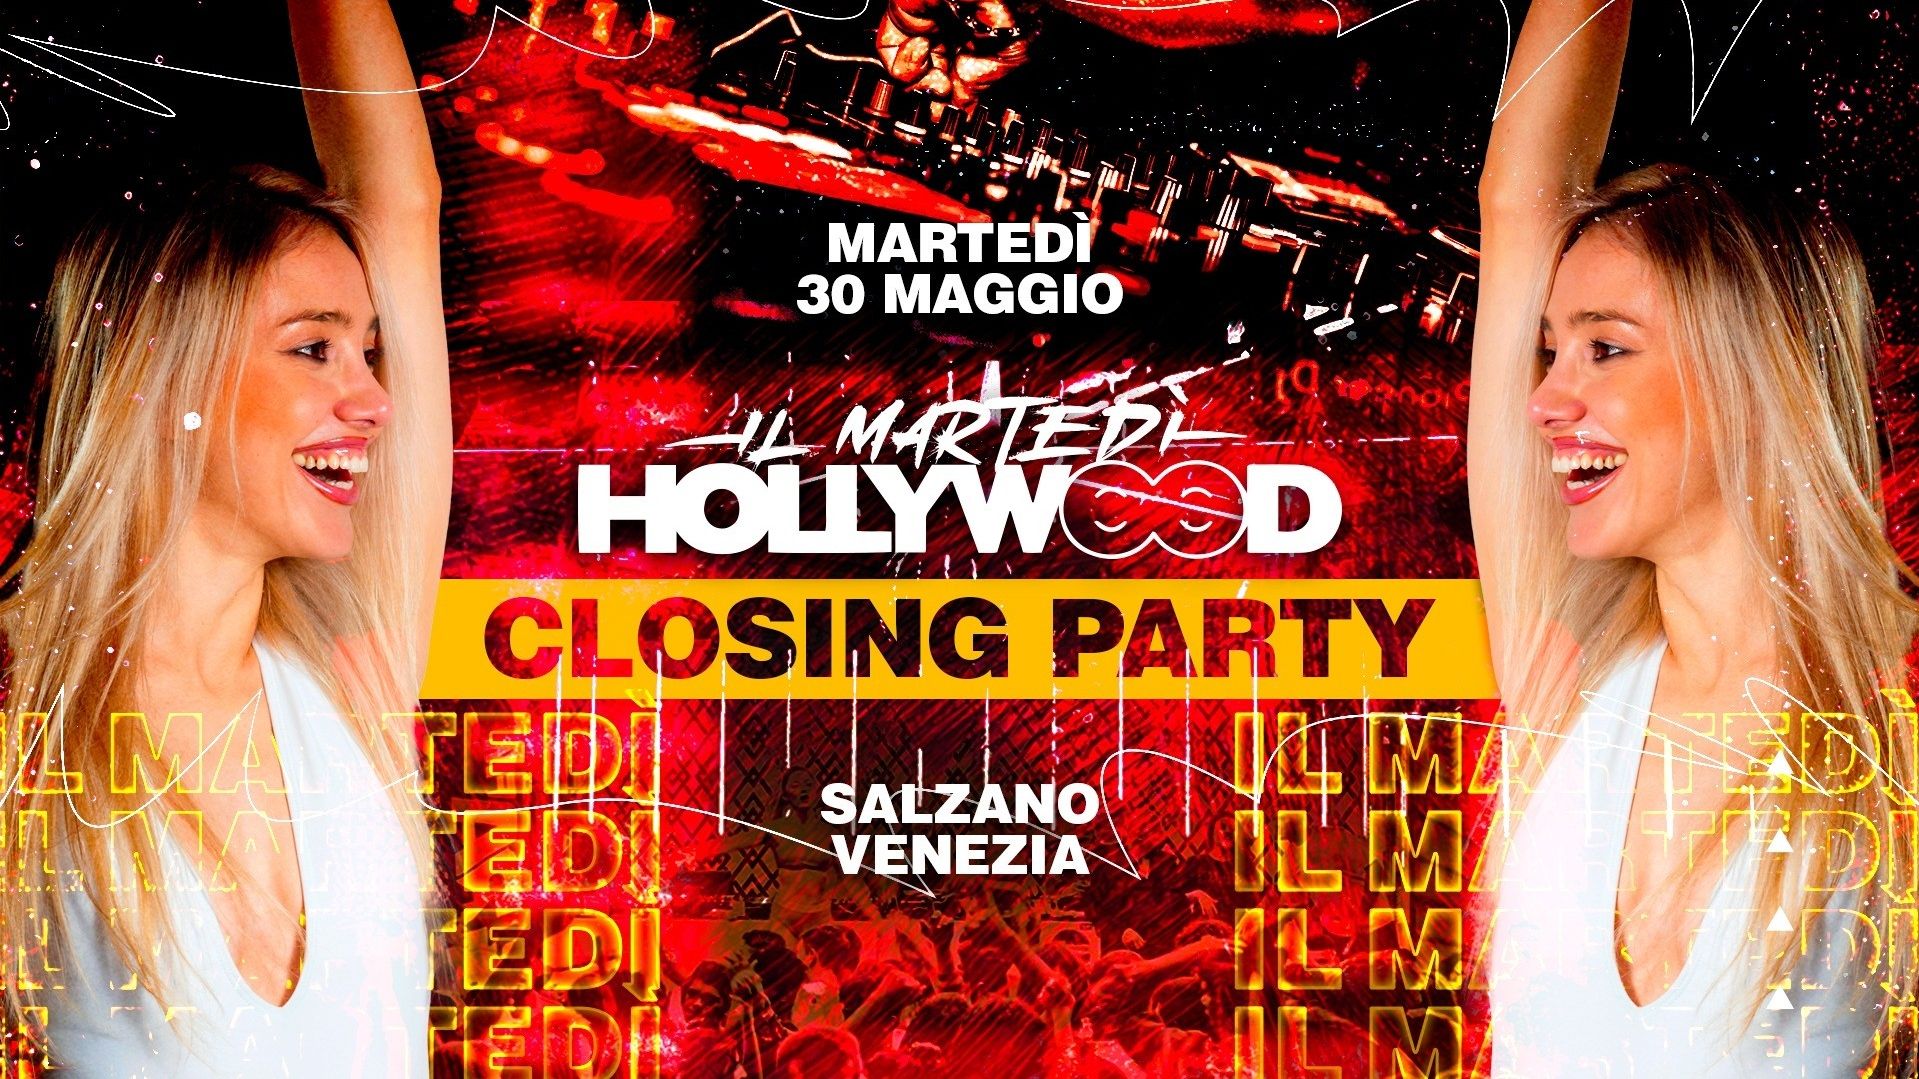 Il Martedì Hollywood - Closing Party